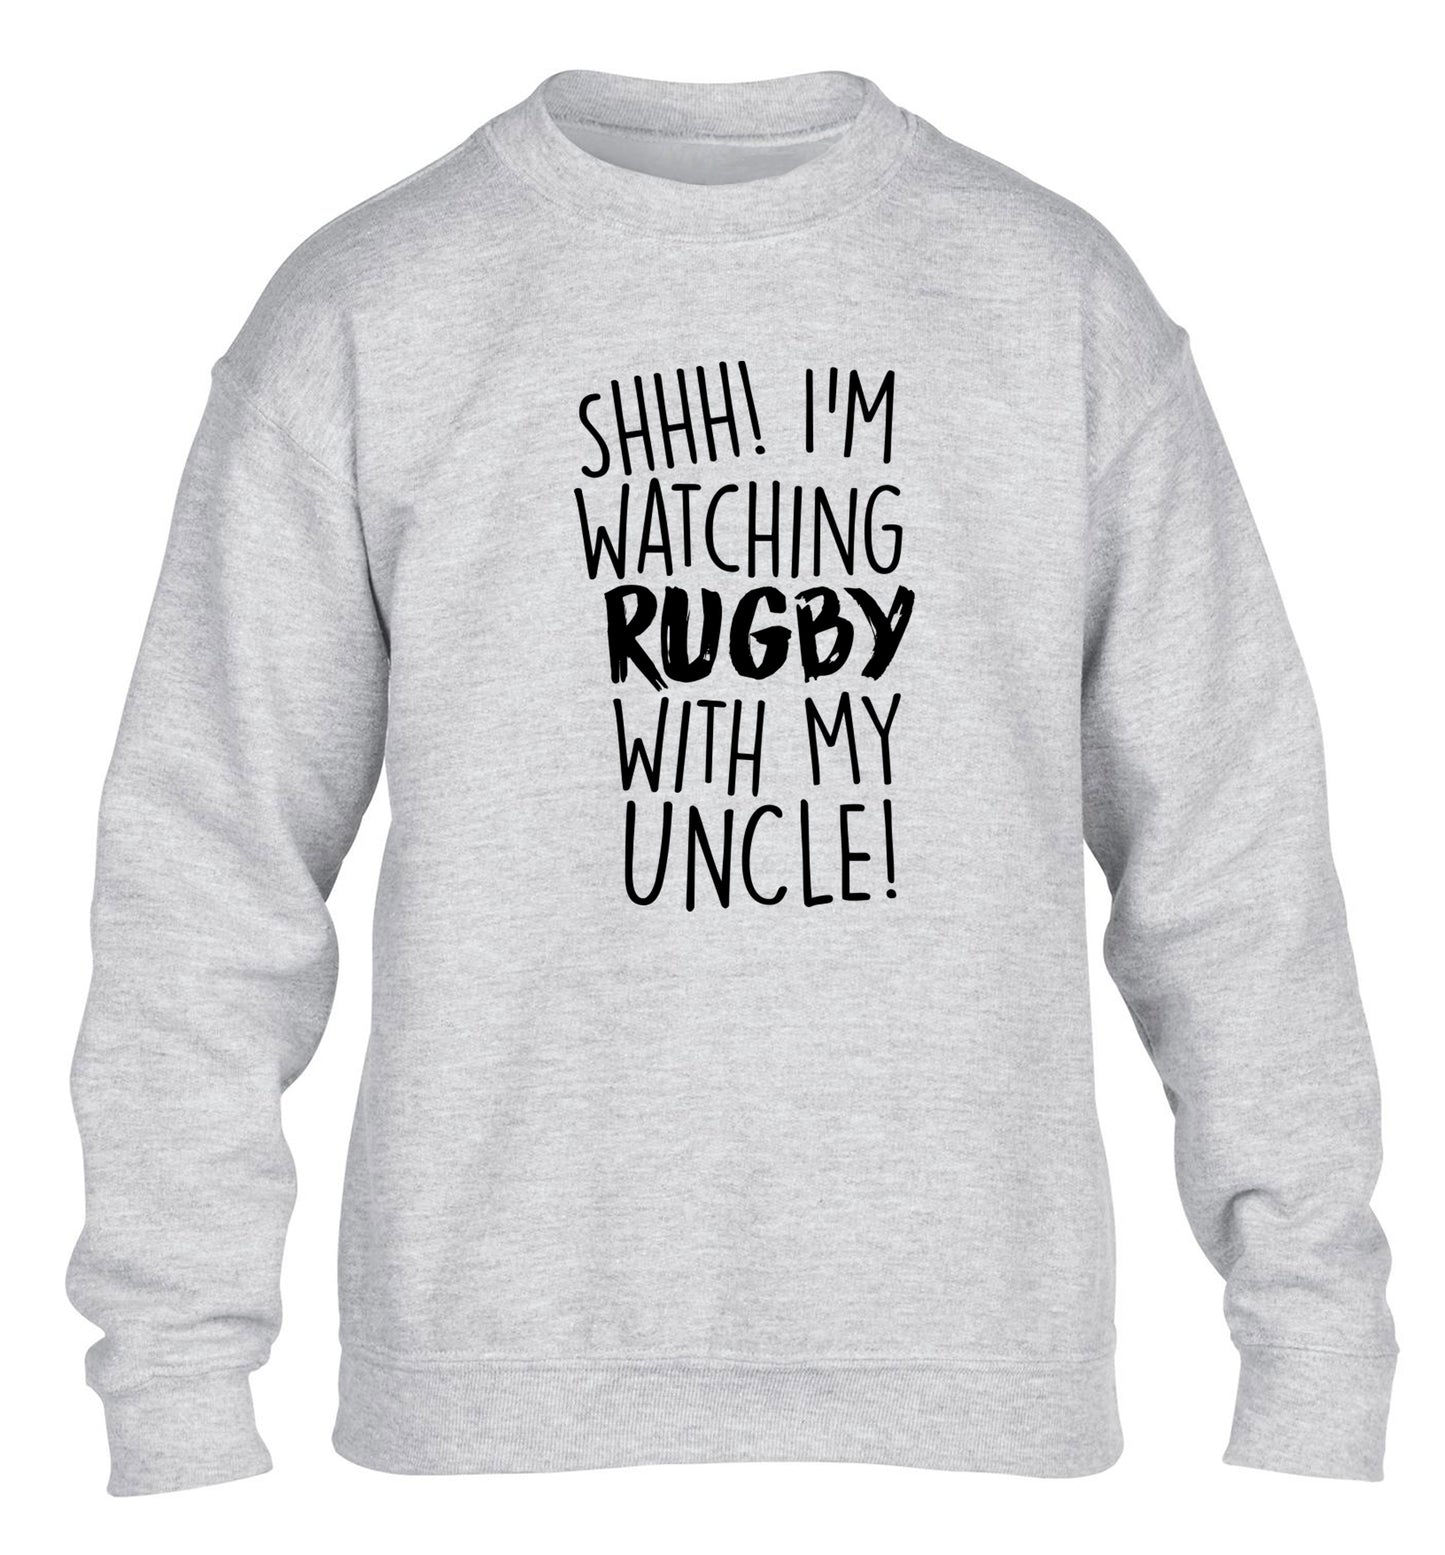 Shh.. I'm watching rugby with my uncle children's grey sweater 12-13 Years